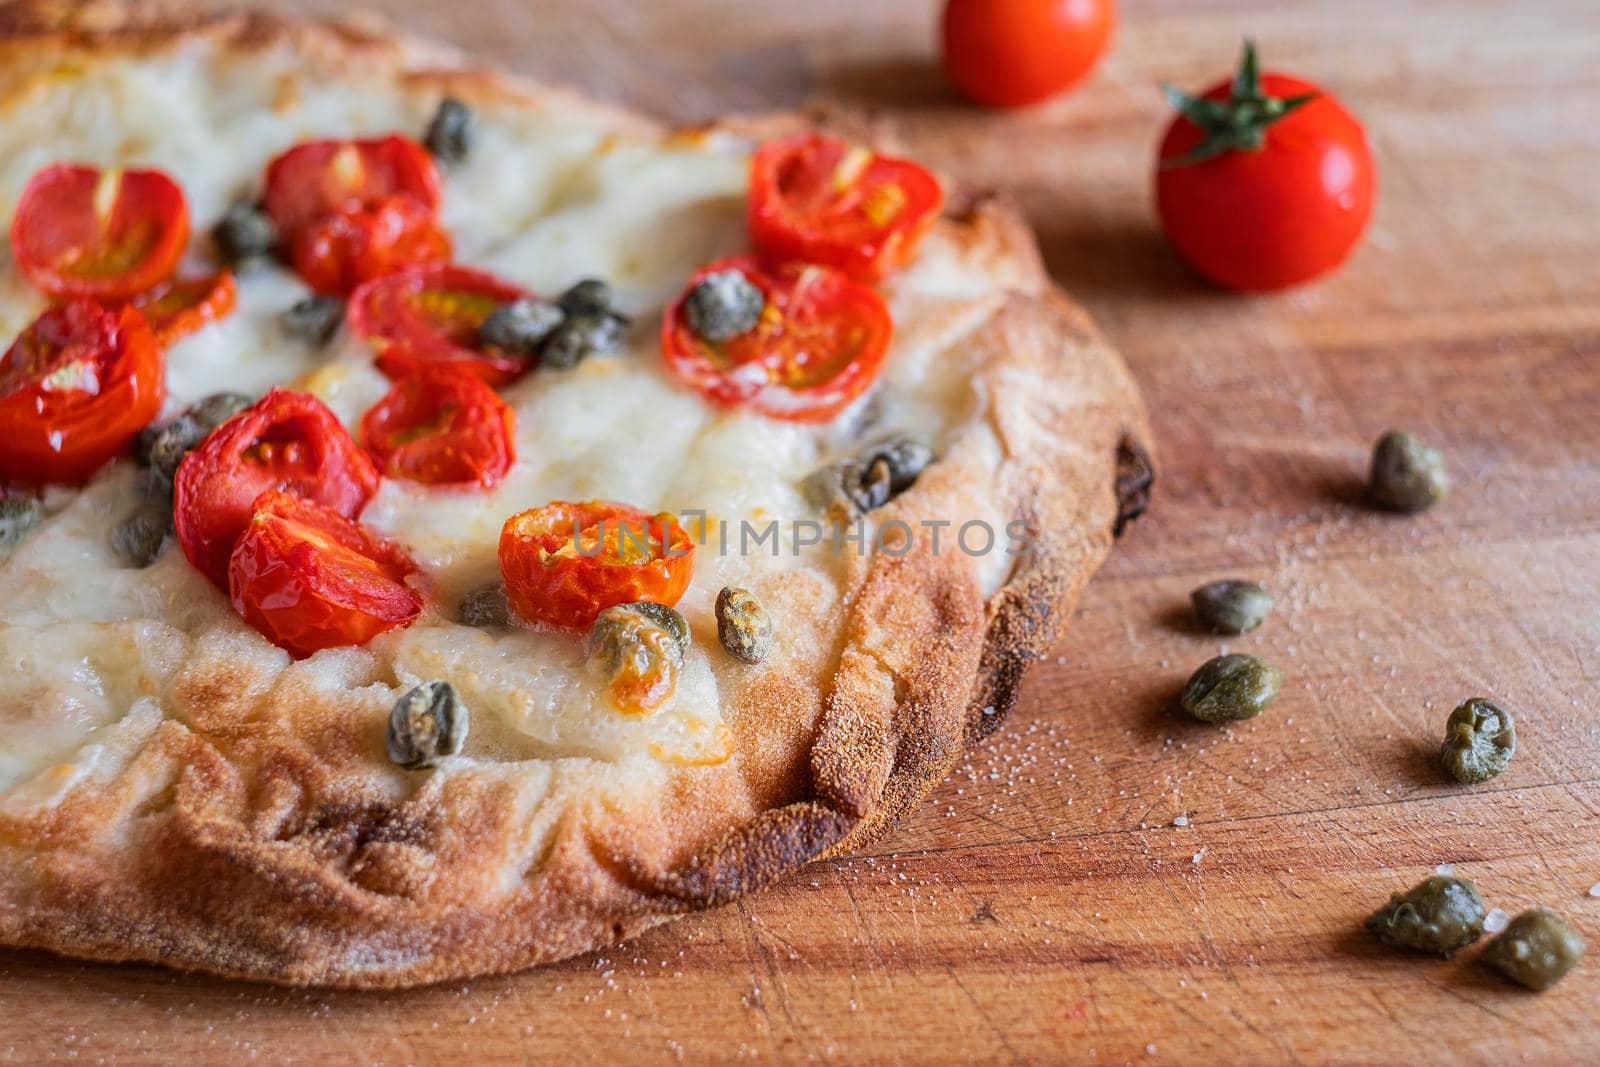 Small homemade vegetarian pizza with addition of tomatoes, capers on a wooden rustic table.